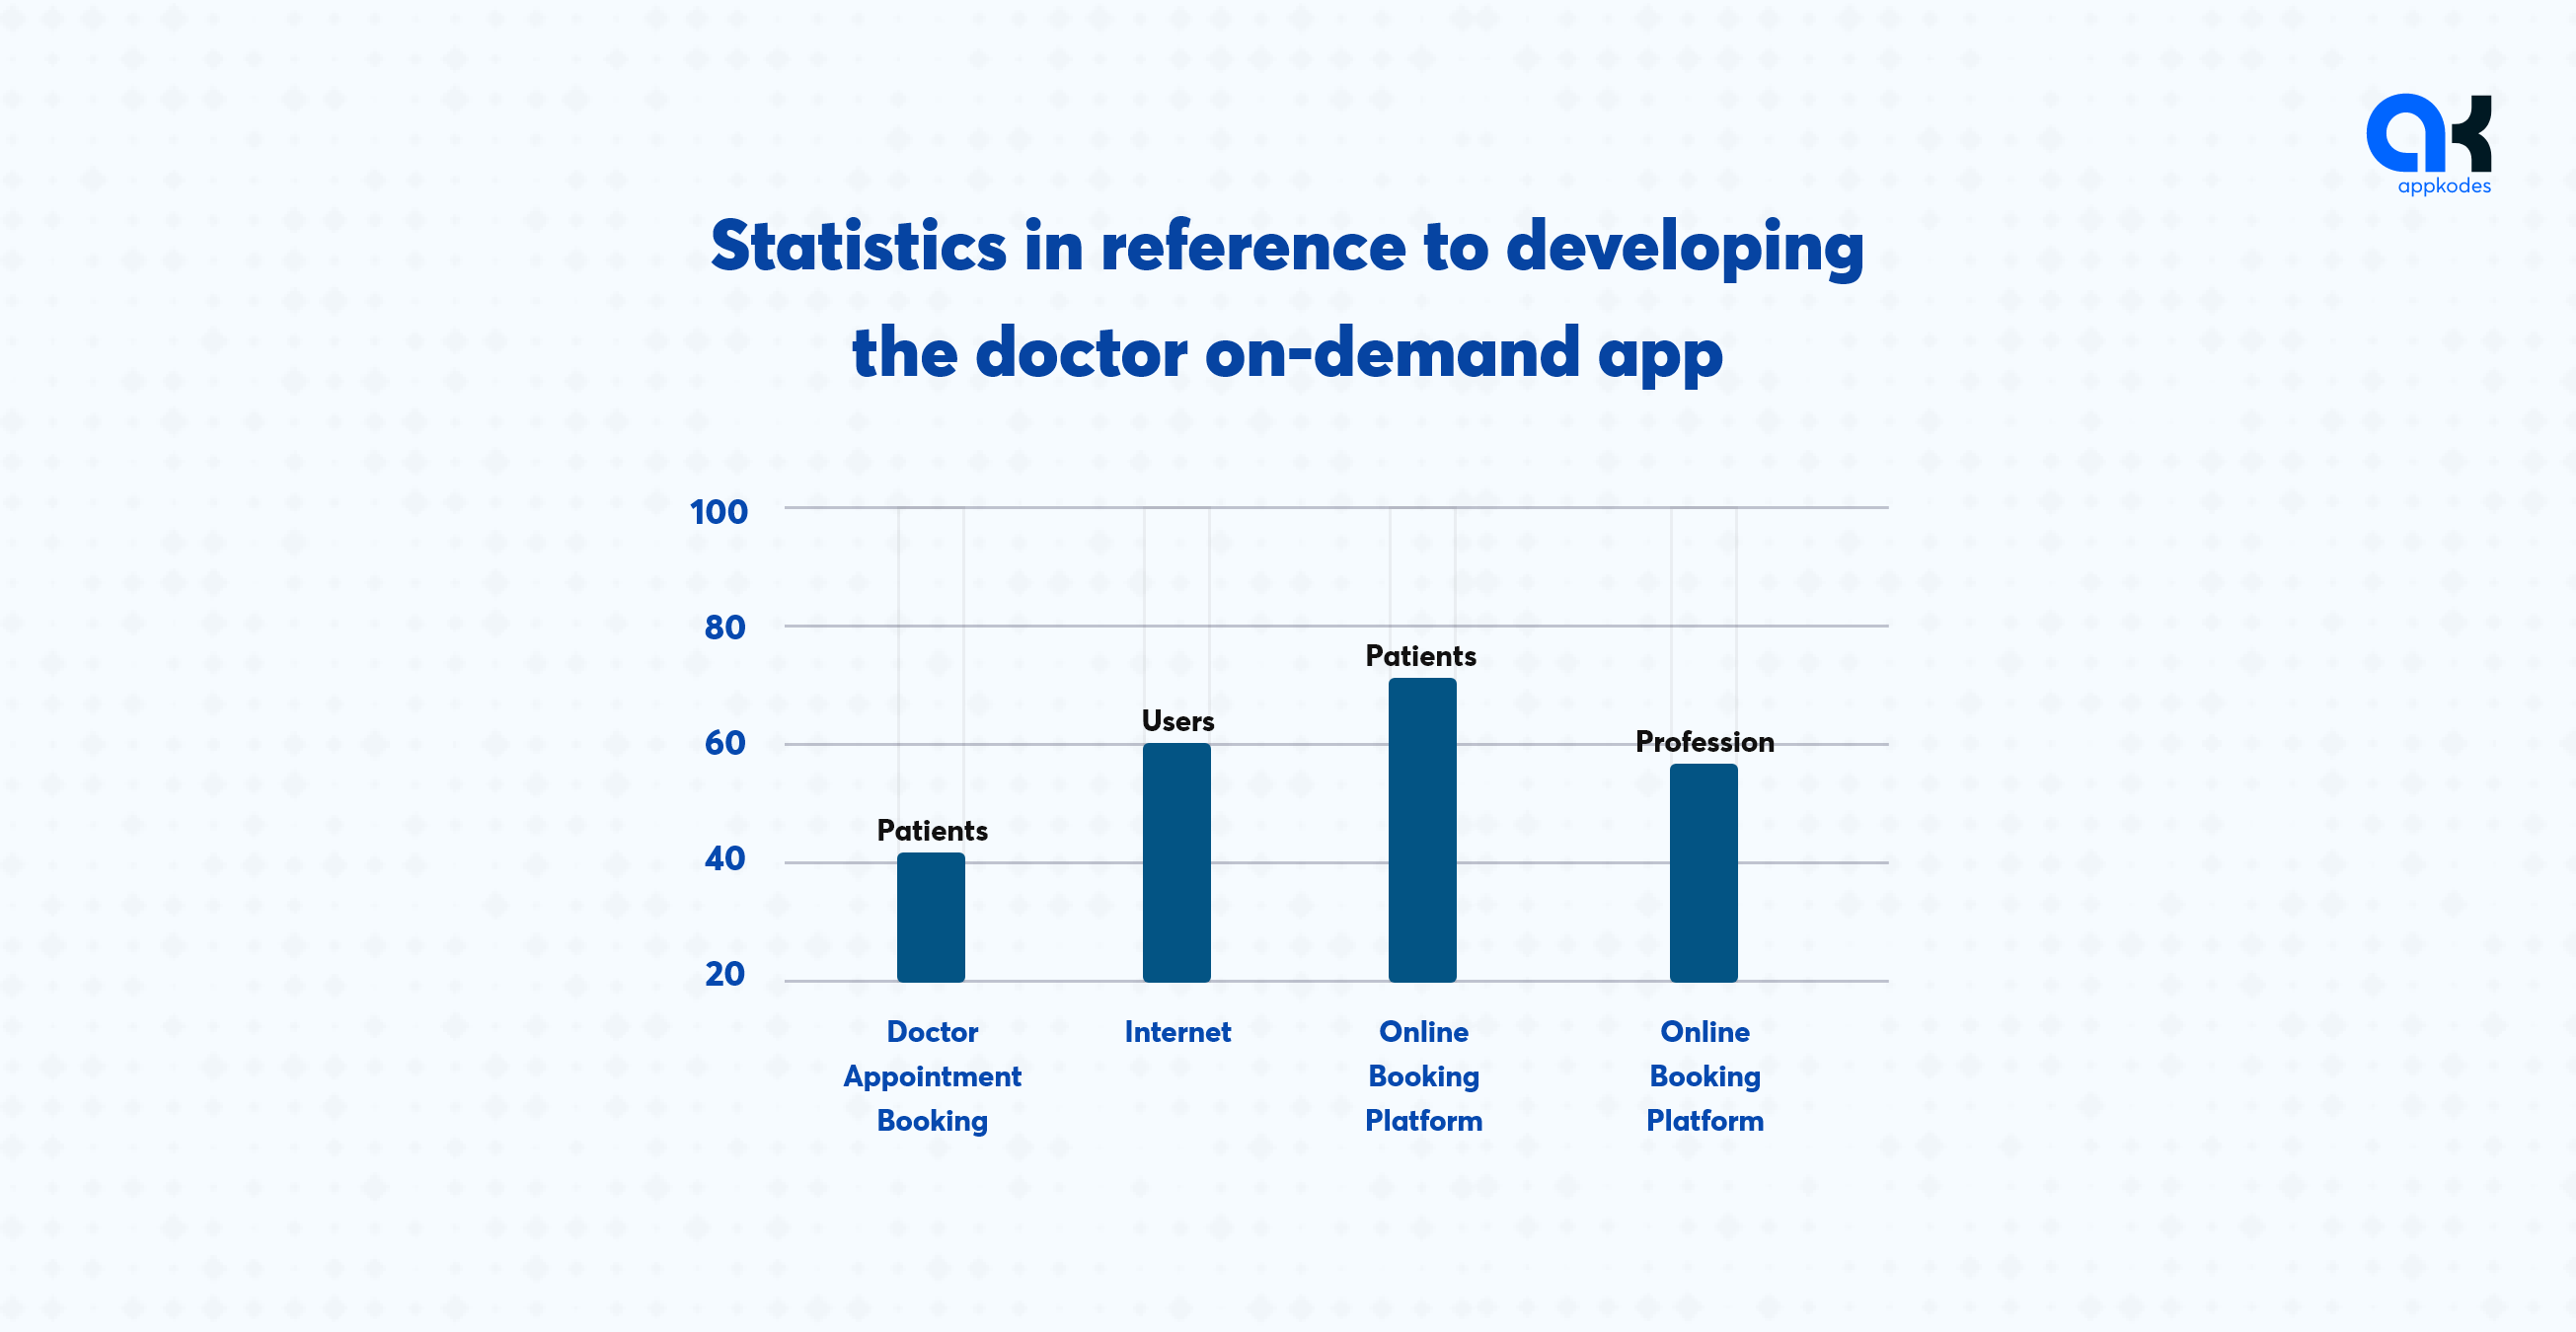 Statistics in reference to developing the doctor on-demand app